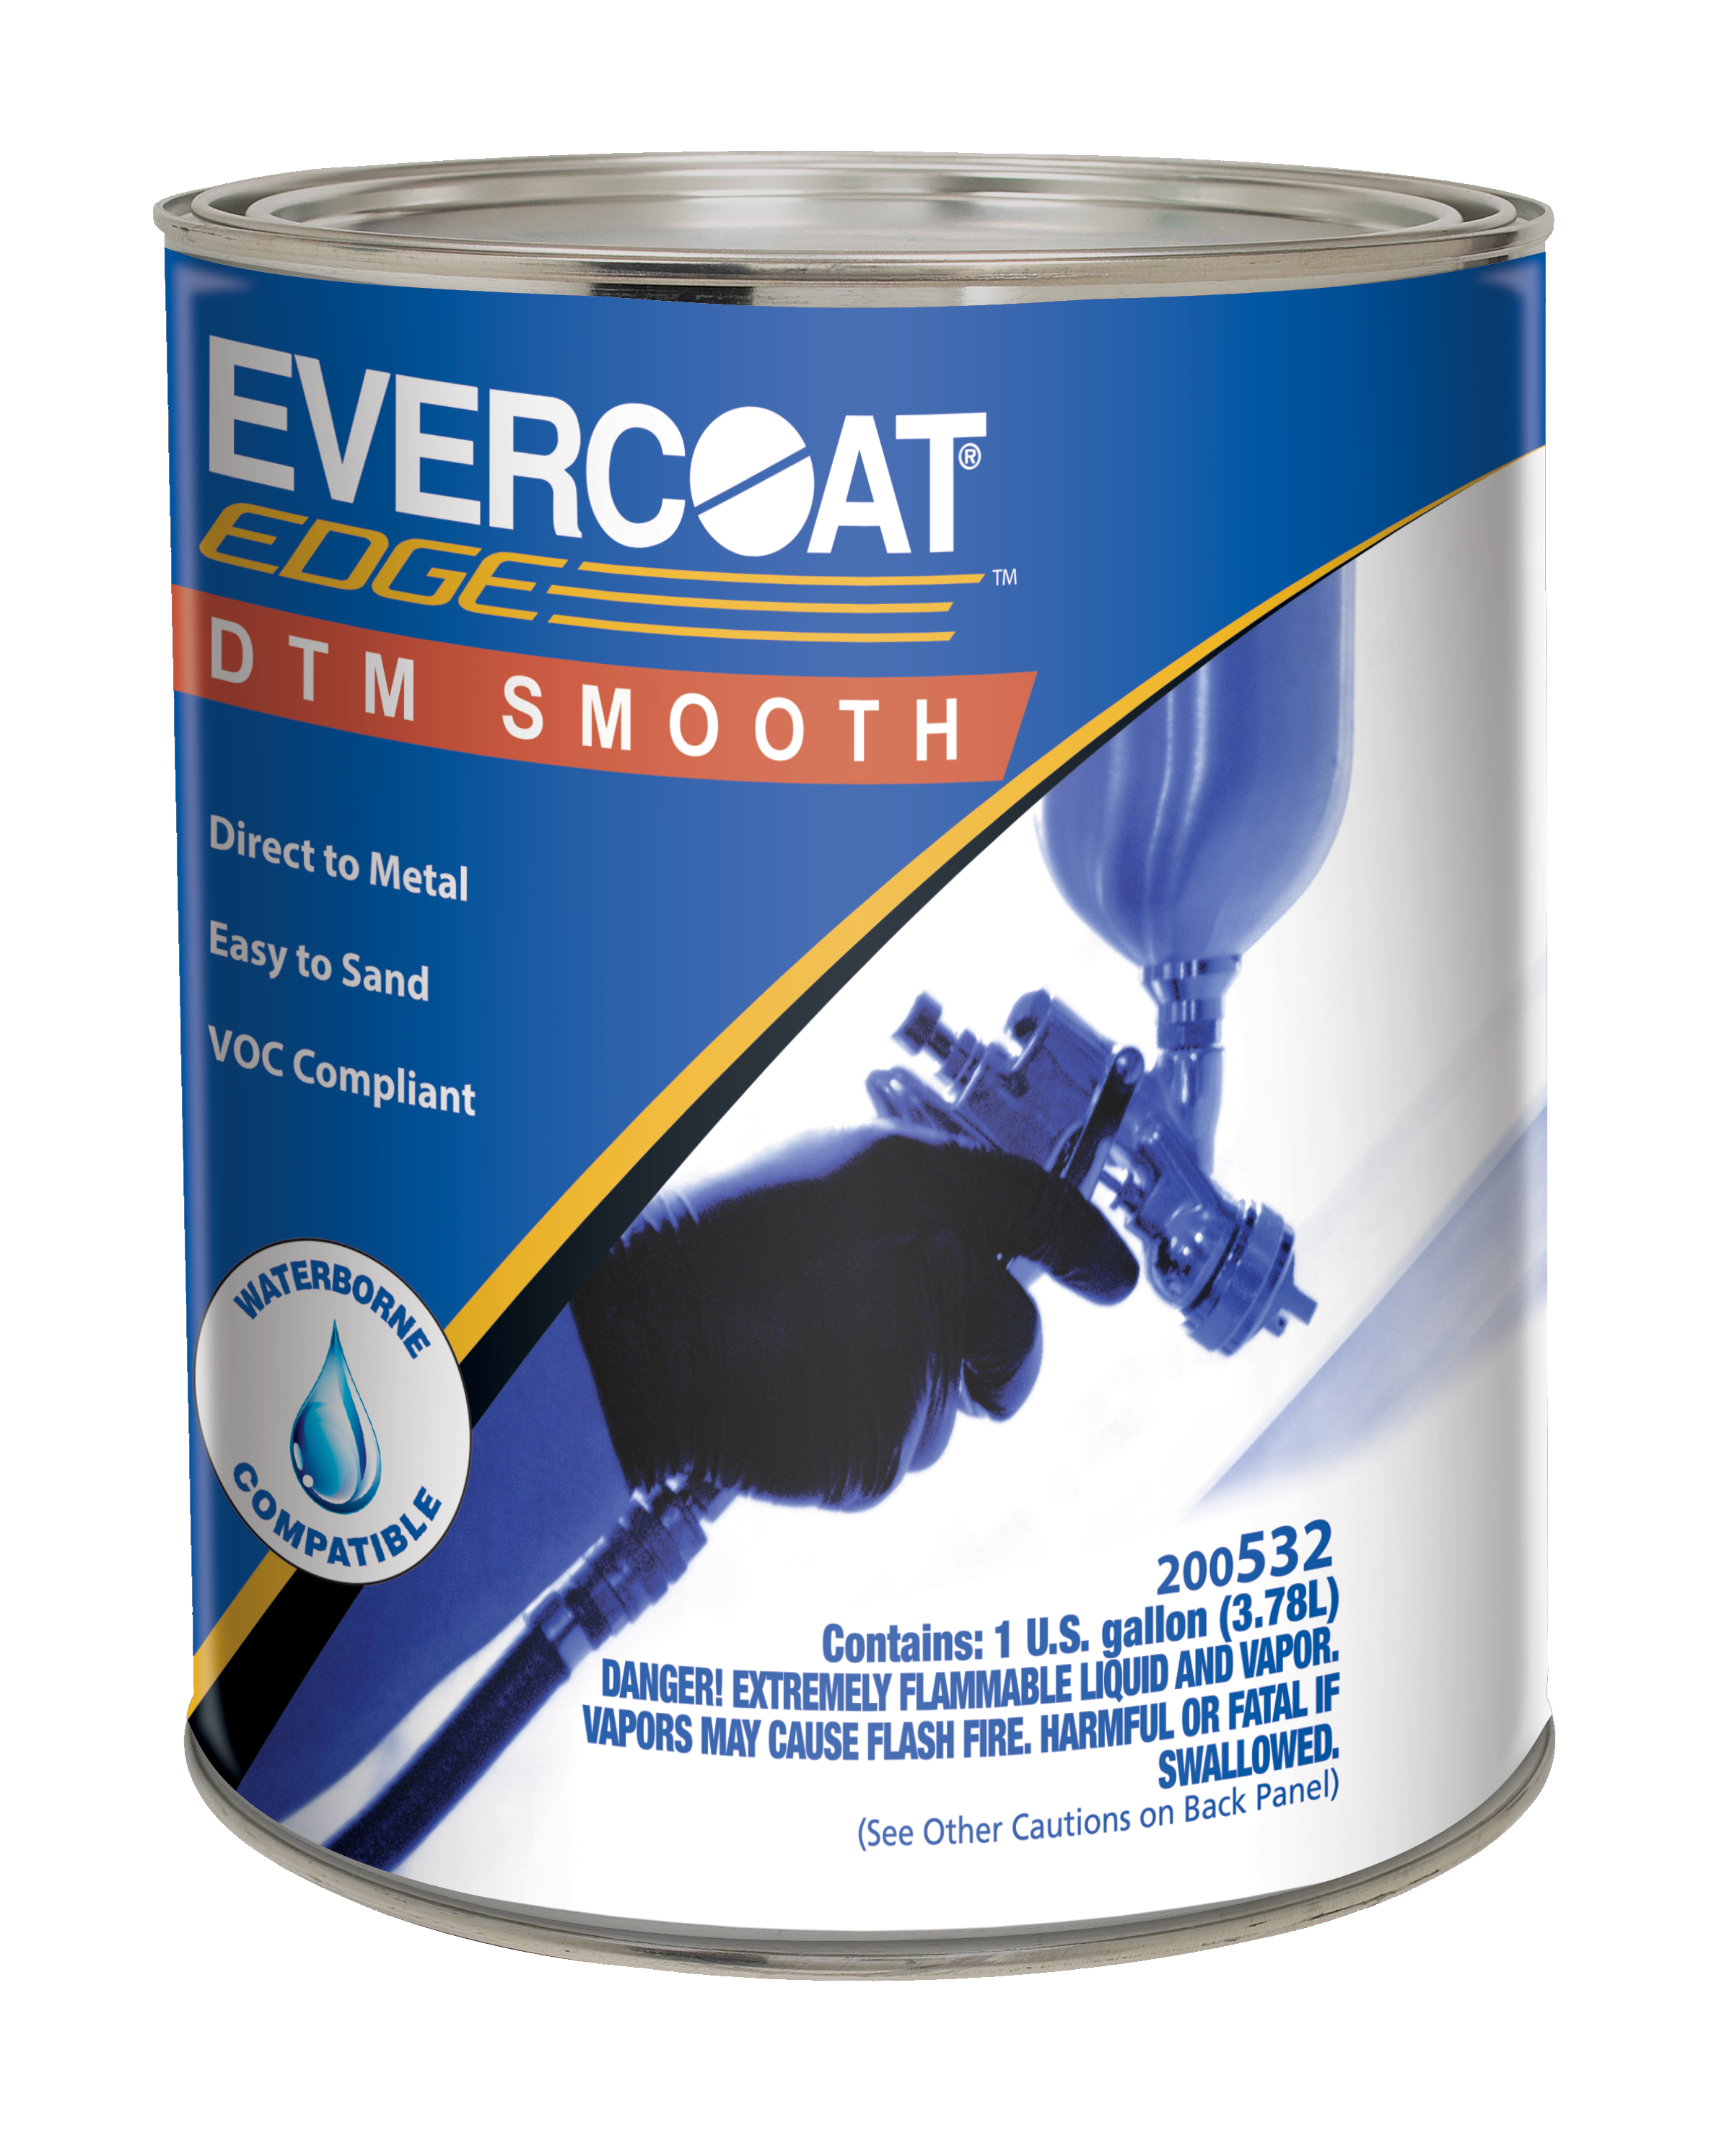 DTM Smooth Primer, Gallon - ITW Evercoat